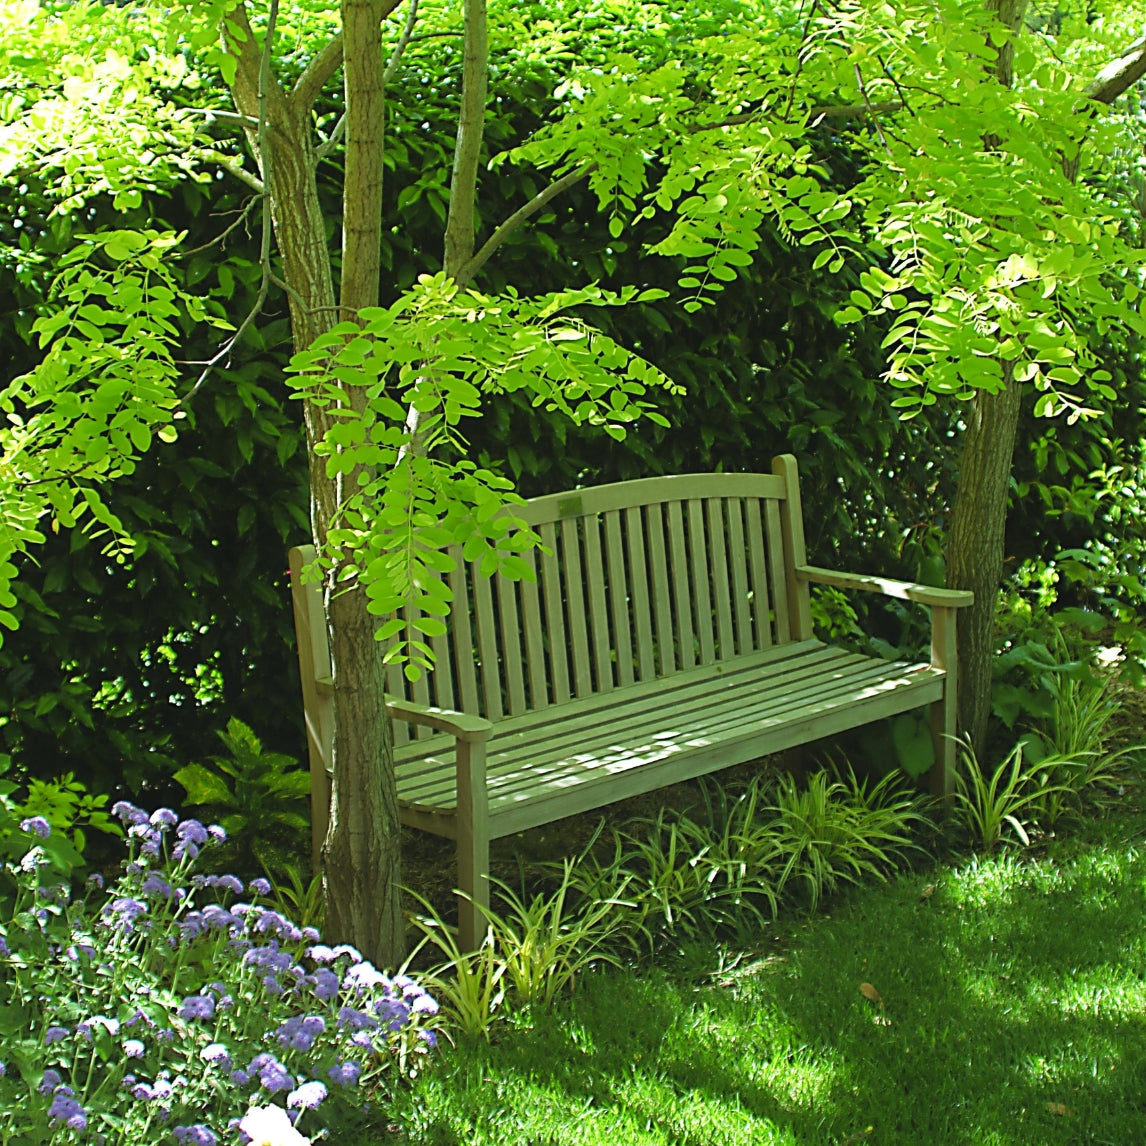 Creating Cooler, greener, more liveable gardens Masterclass